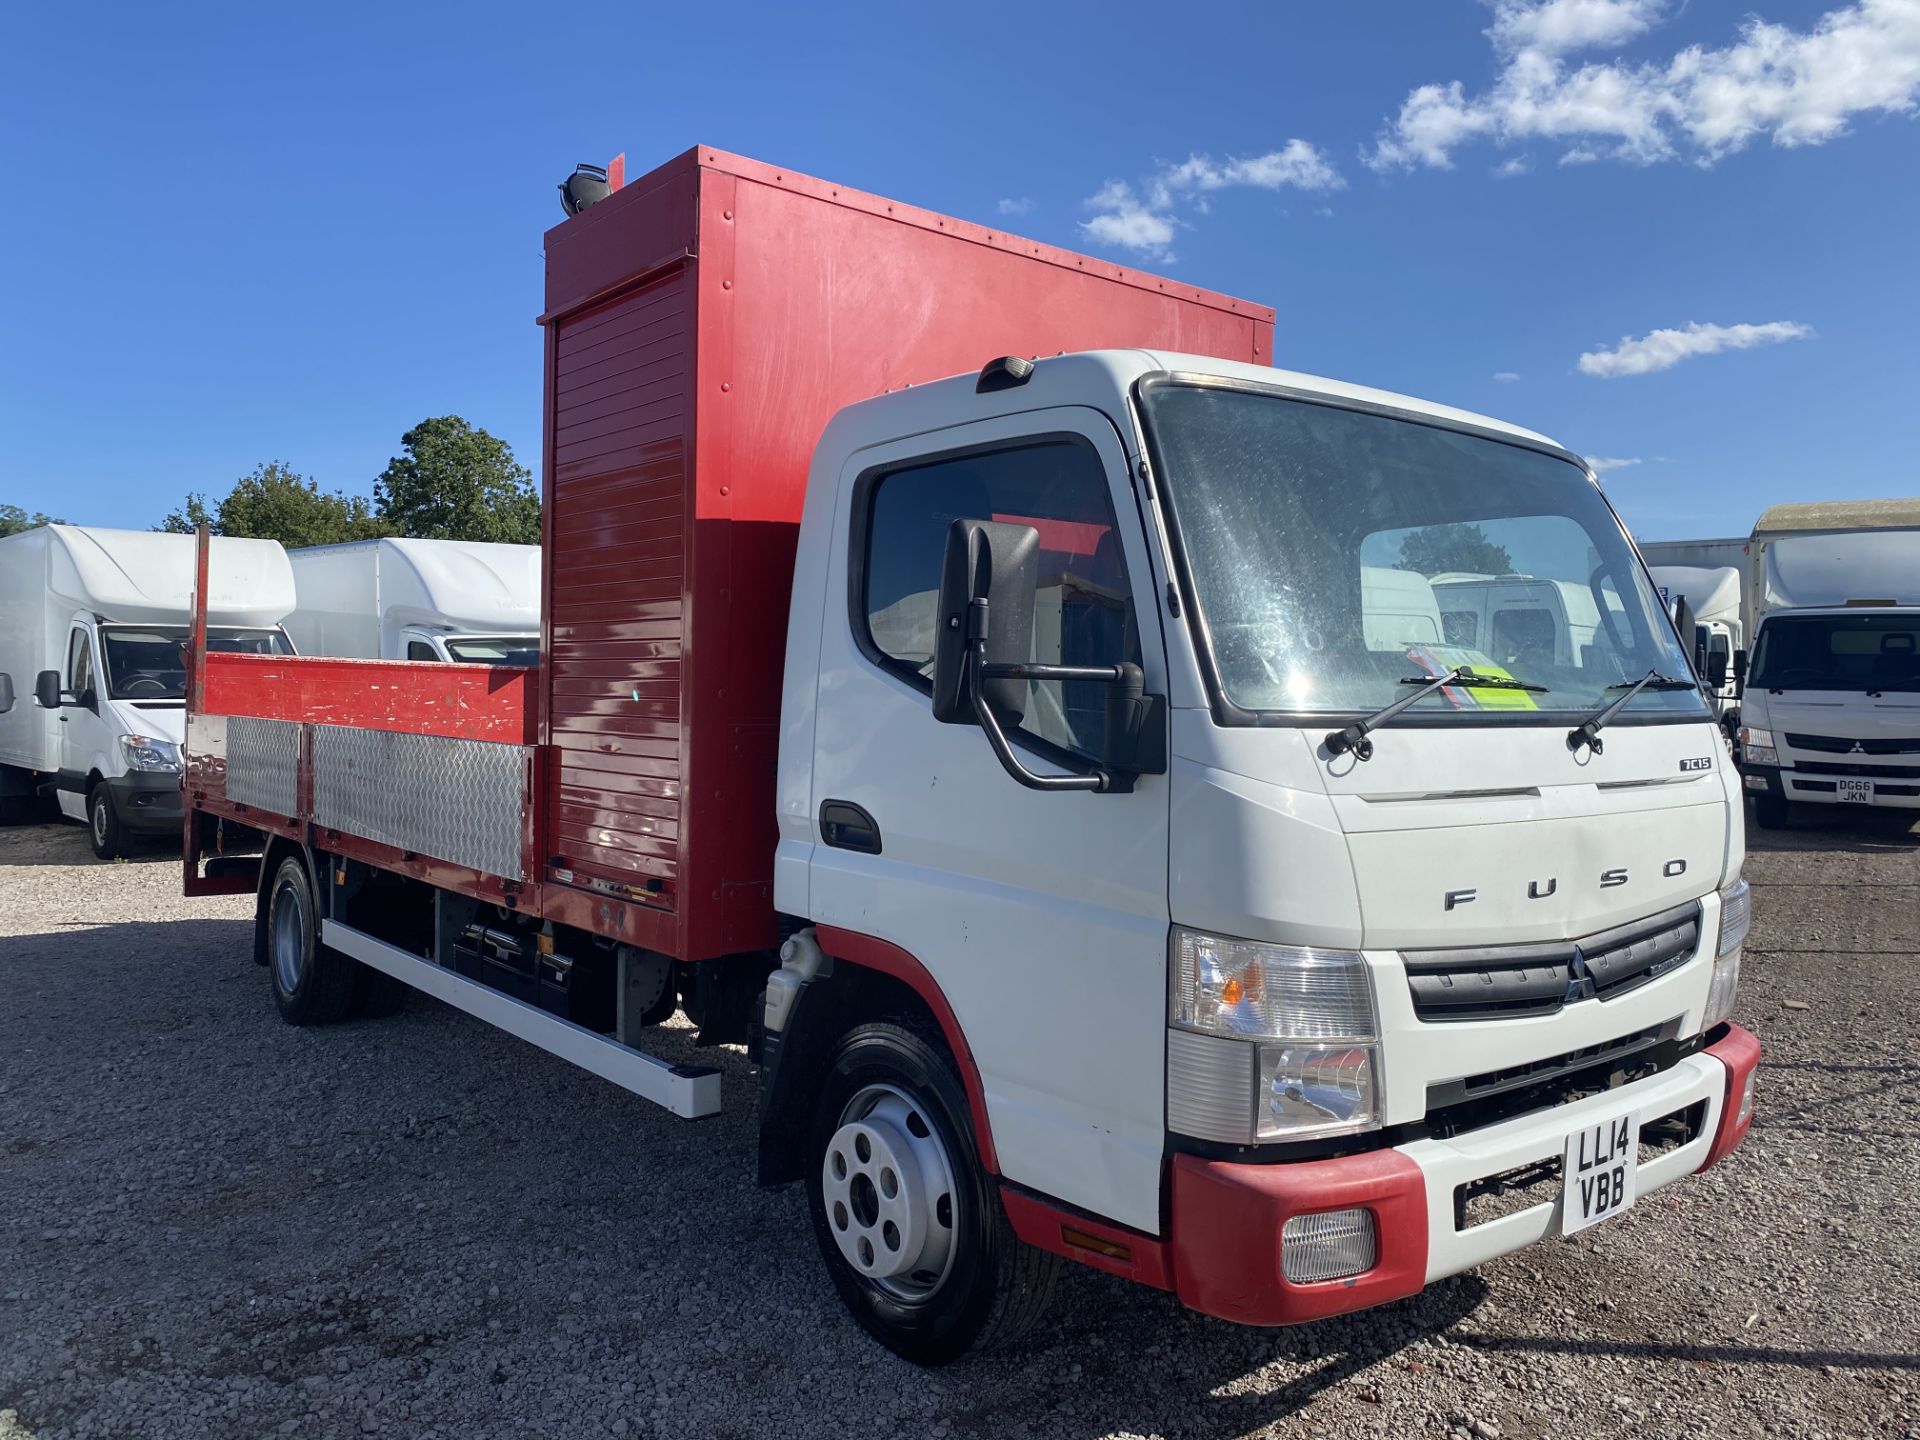 MITSUBISHI CANTER 7C15 (150) LWB DOUBLE DROPSIDE WITH TAIL LIFT - 14 REG - EURO 6 - ULEZ COMPLIANT